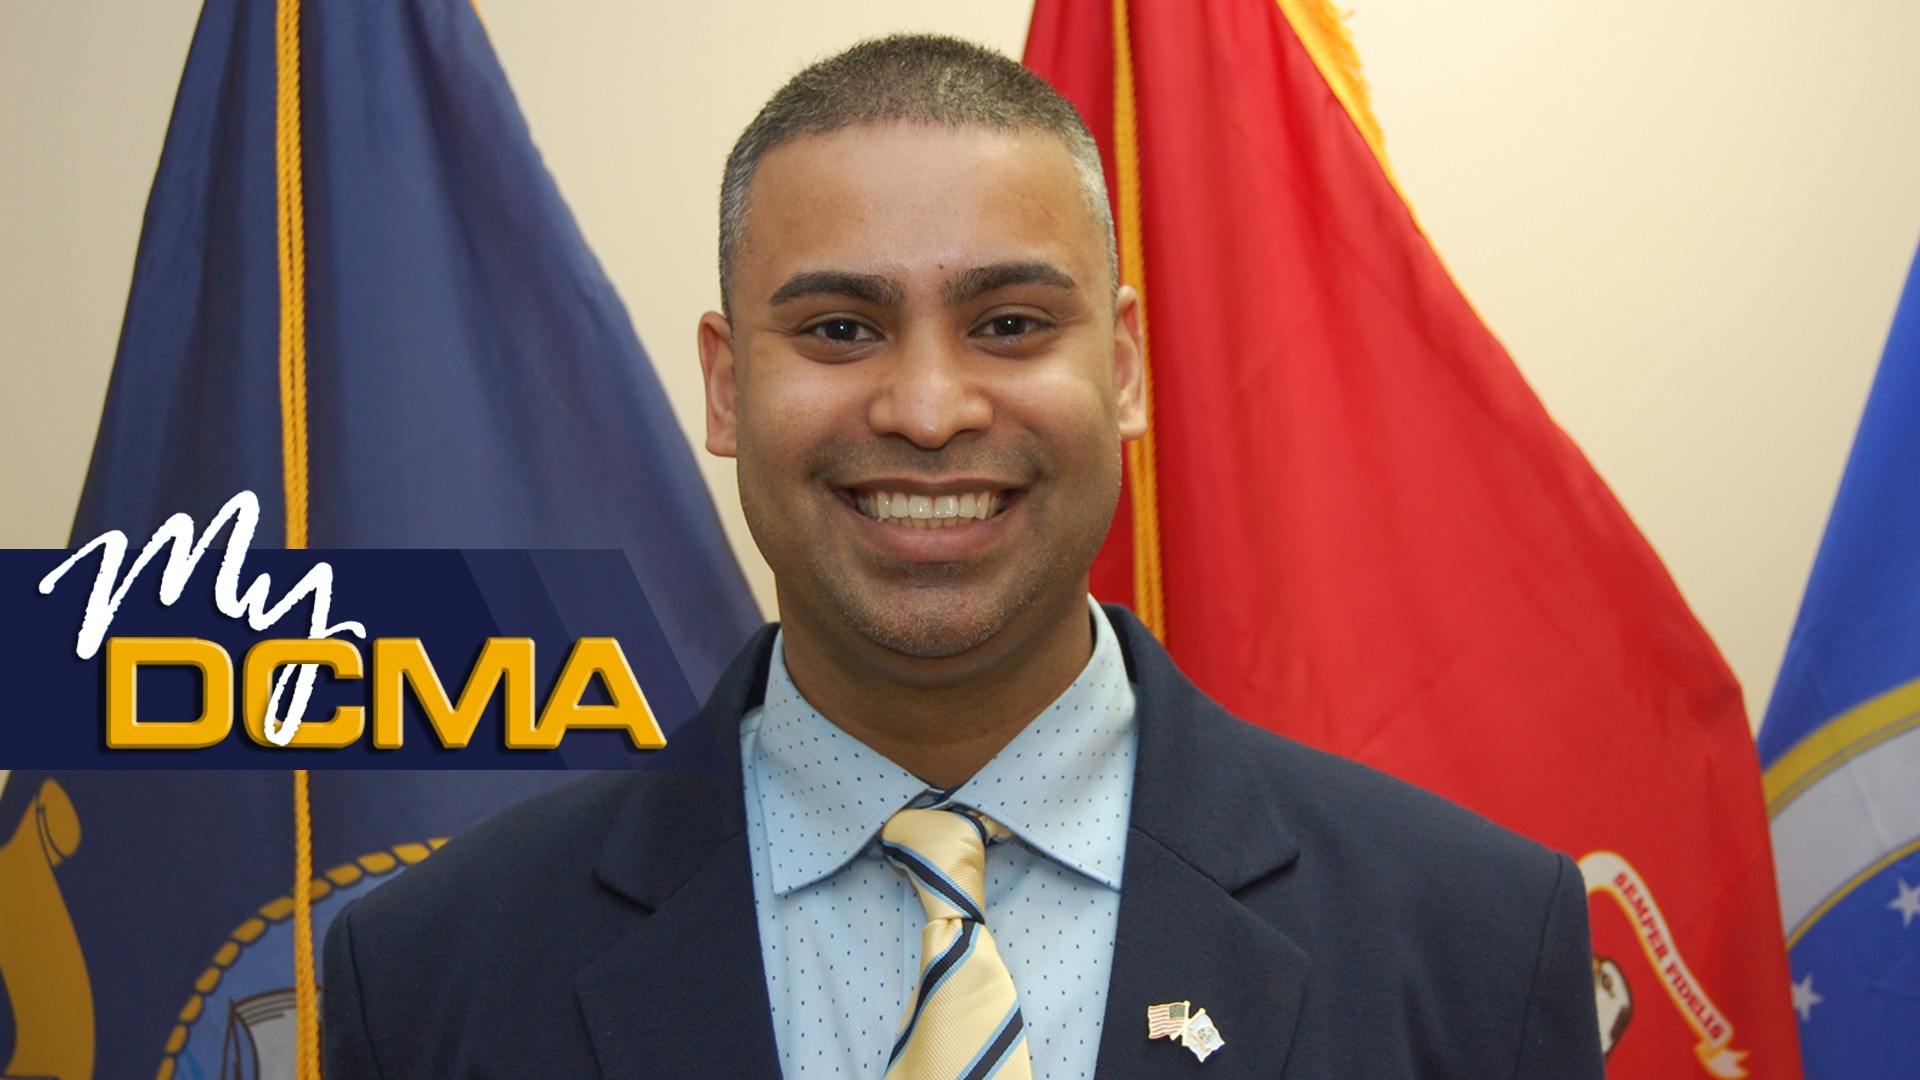 A smiling man in a suit stands in front of the various DCMA flags.